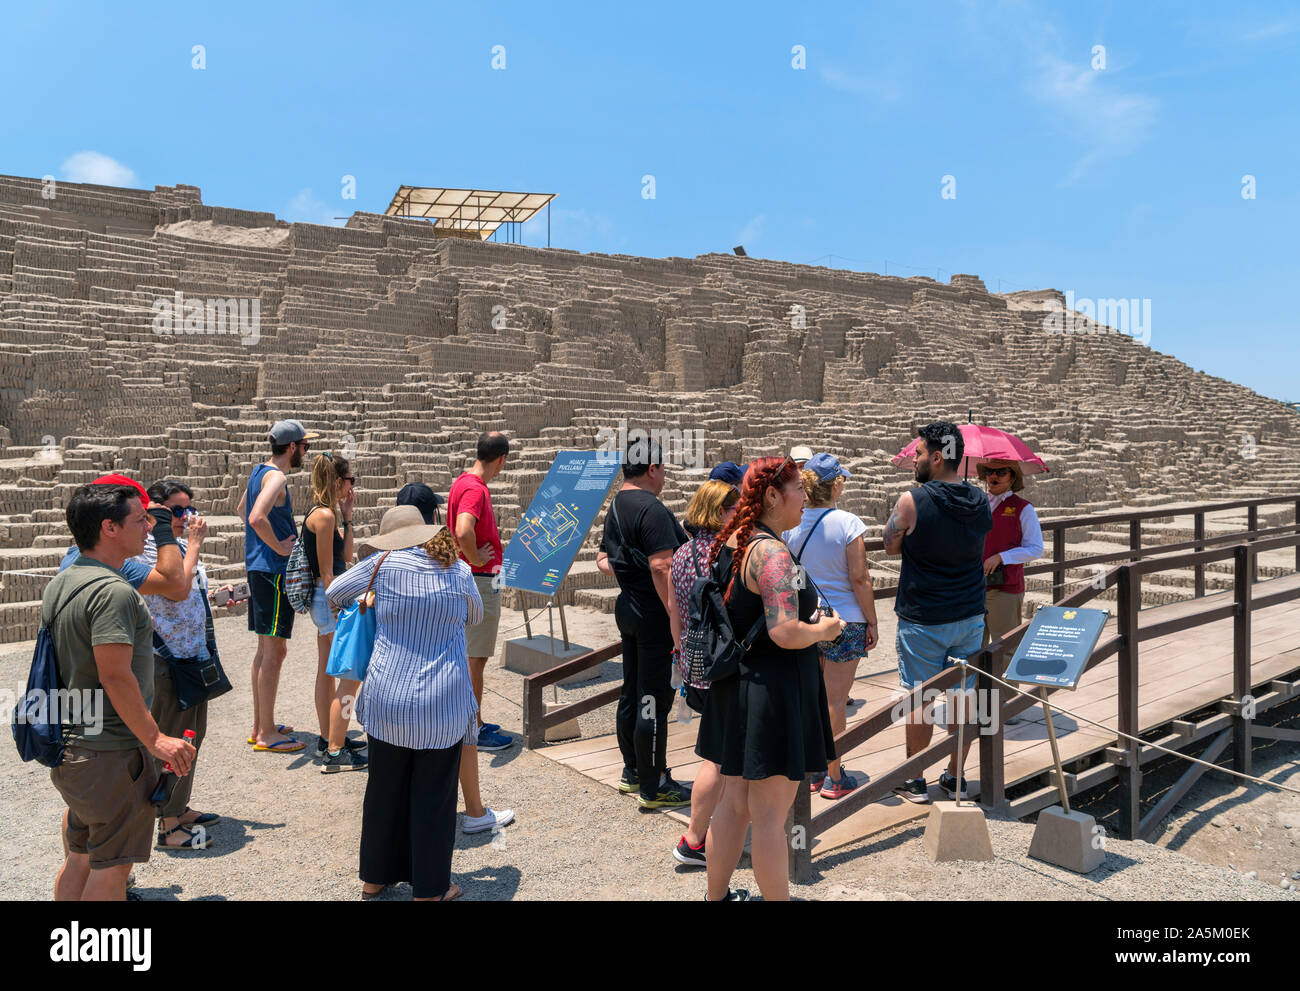 Huaca Pucllana, Lima. Visitors on a guided tour of the ruins of Huaca Pucllana, an adobe pyramid dating from around 400 AD, Miraflores, Lima, Peru, So Stock Photo